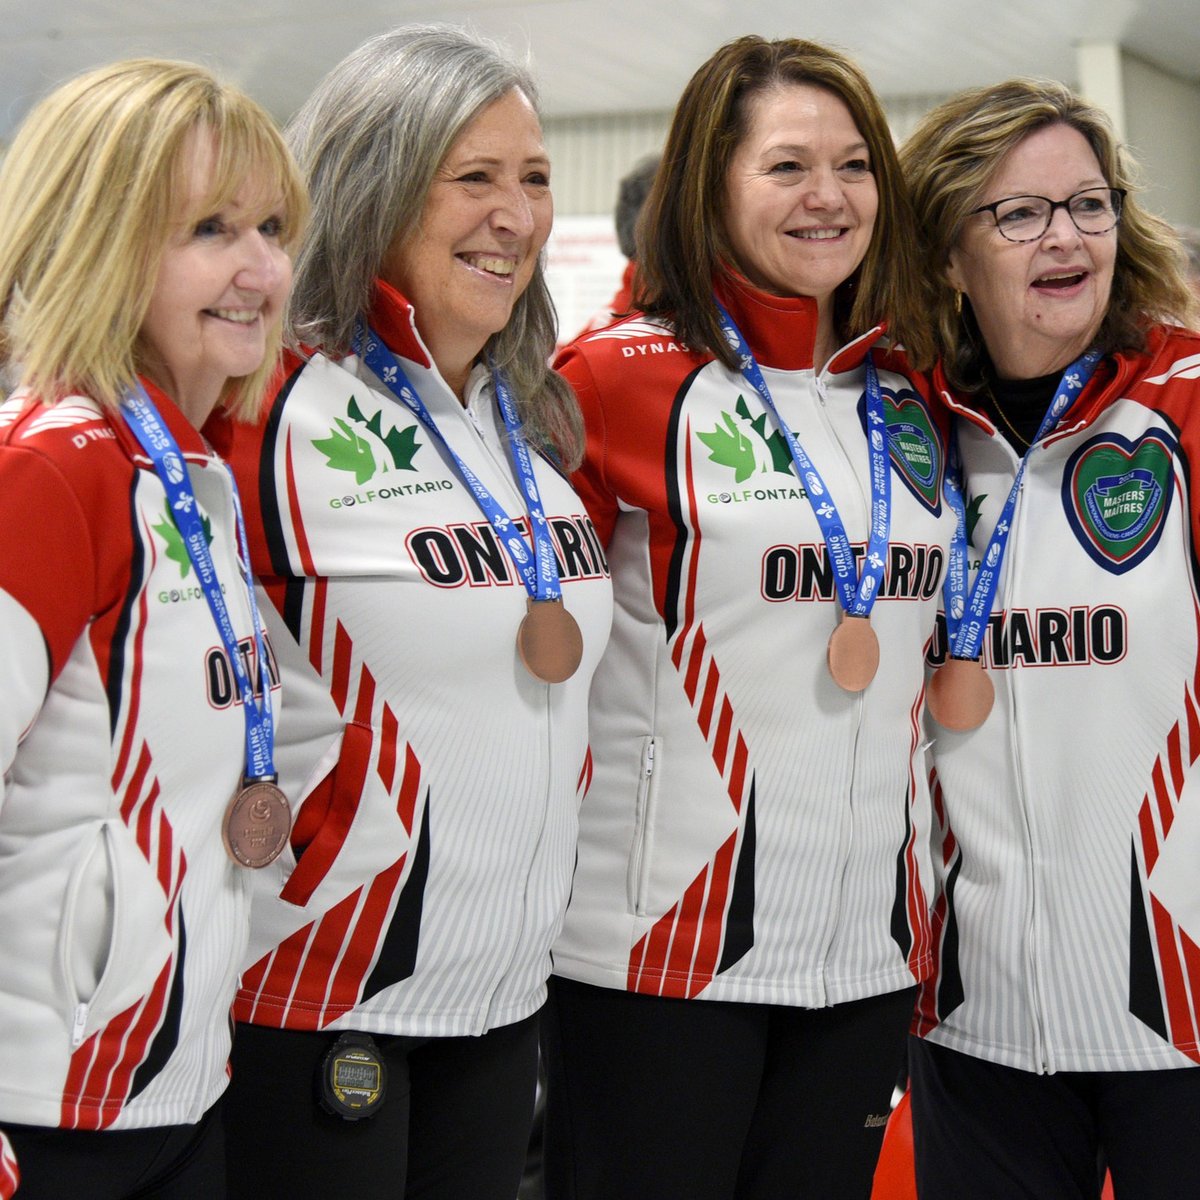 🥉👏 Big applause to Team Goring for clinching the Bronze Medal at the Canadian Masters! 🎉 These talented ladies have showcased remarkable expertise and unwavering spirit, making Ontario beam with pride! 🌟 Well done Team Goring! #BronzeMedalists #GravenhurstCurlingClub